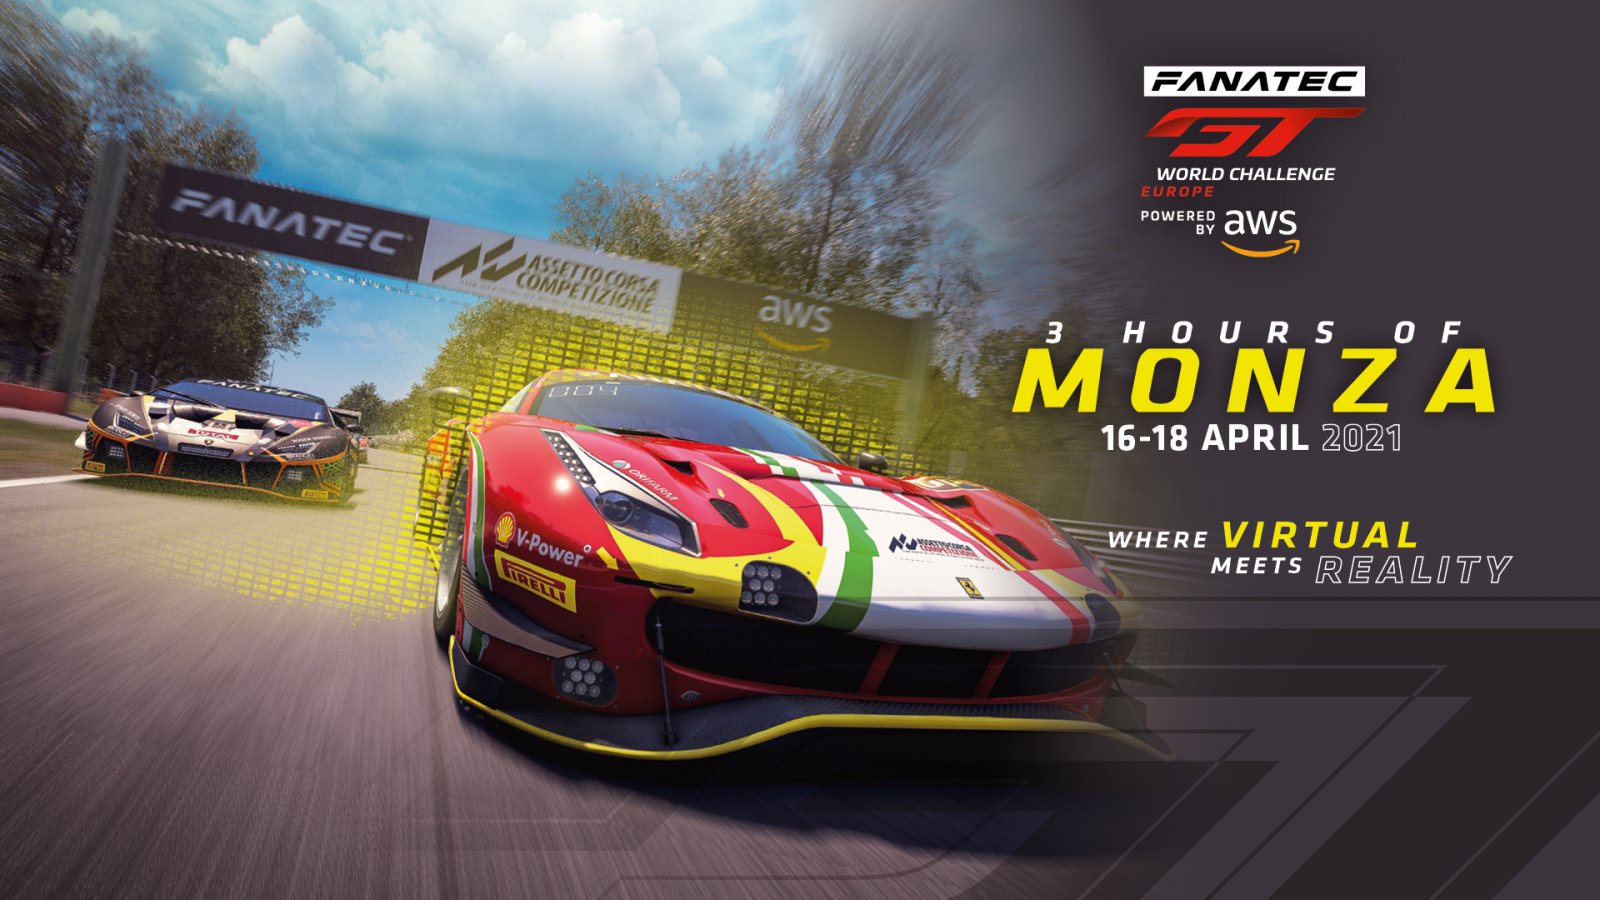 Fanatec GT World Challenge Europe Powered by AWS returns to Monza for 2021 season launch